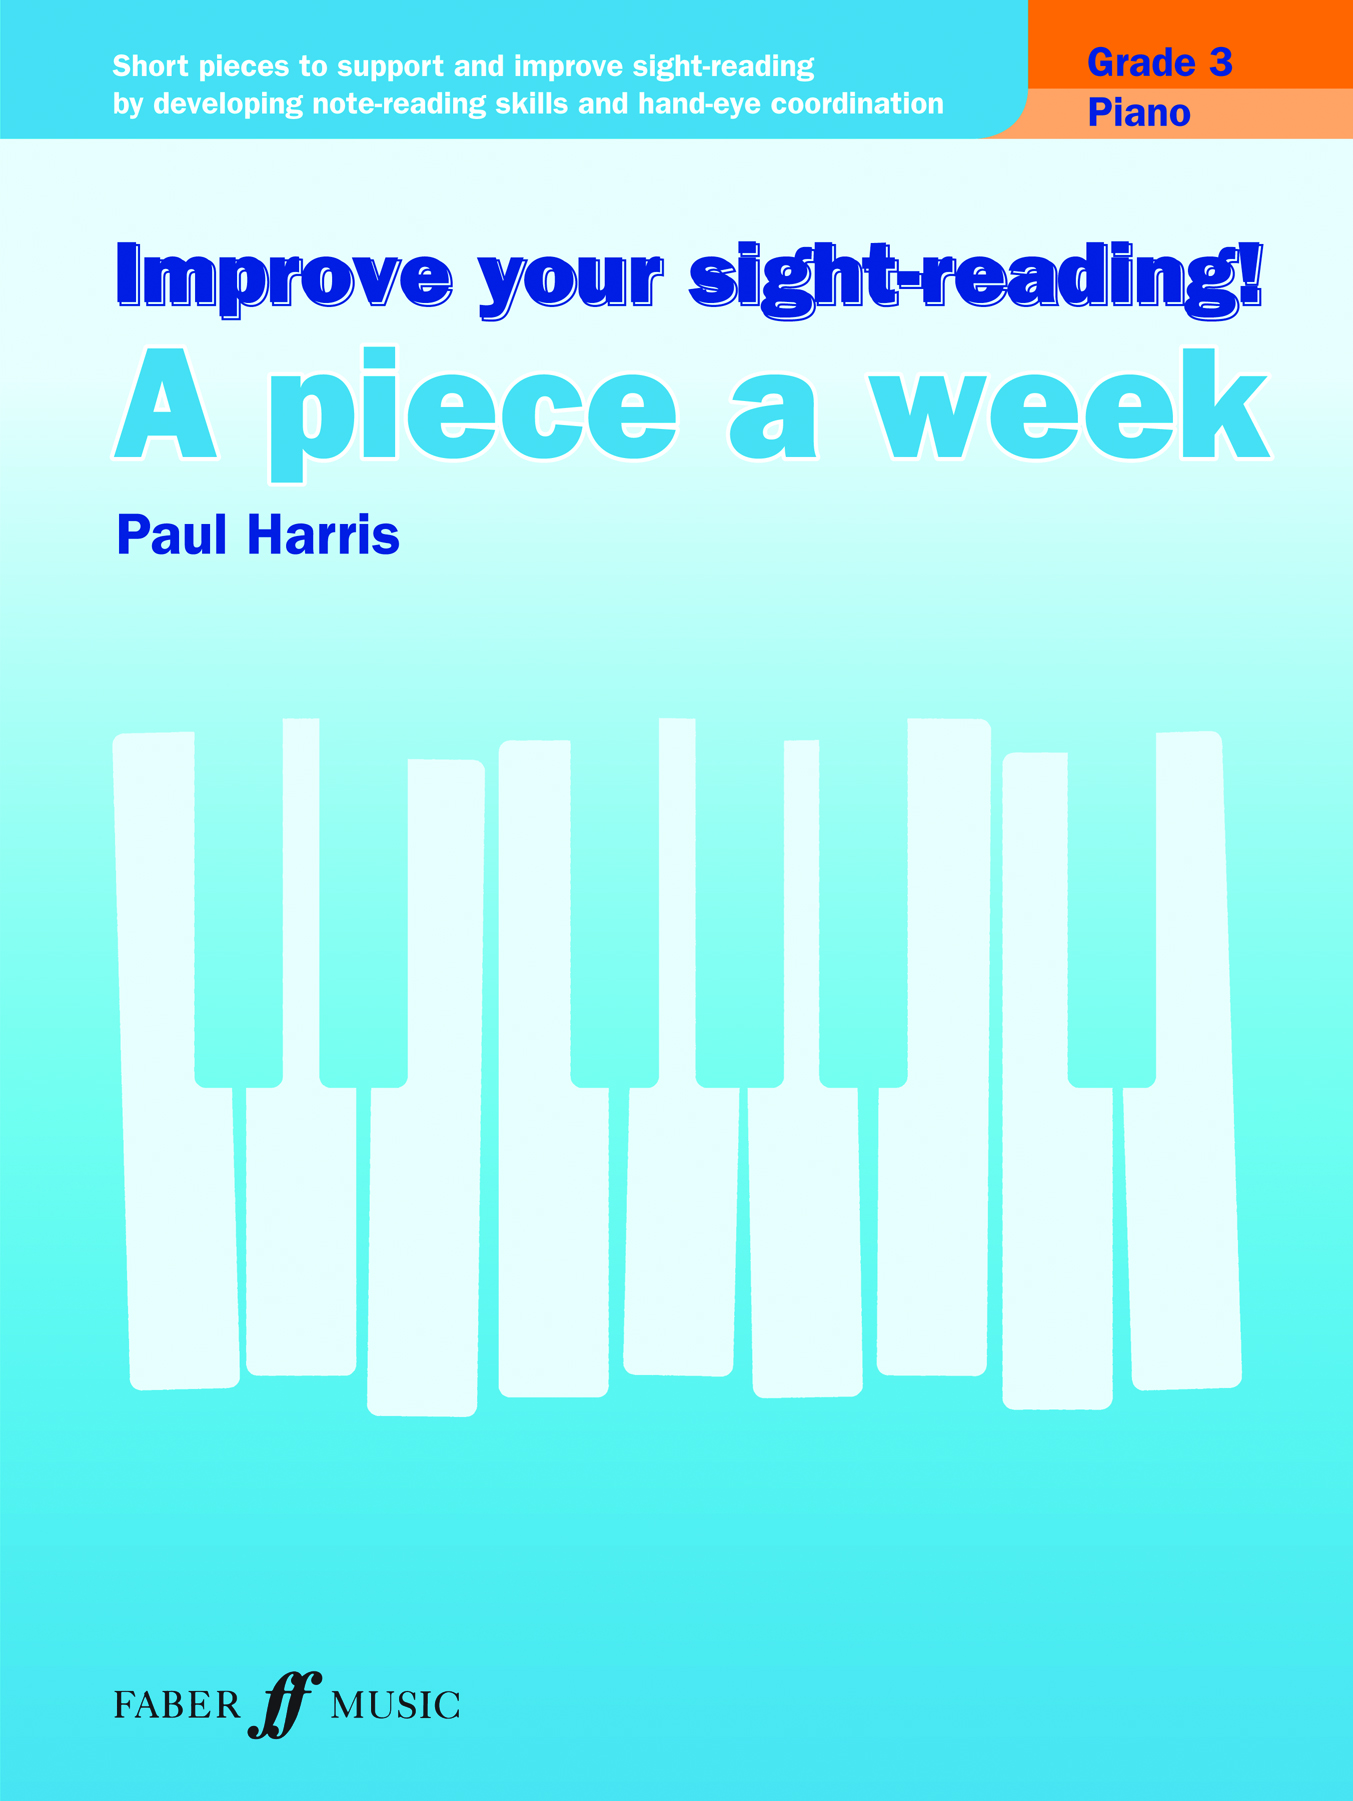 Improve your sight-reading! A piece a week Piano Grade 3 (HARRIS PAUL)